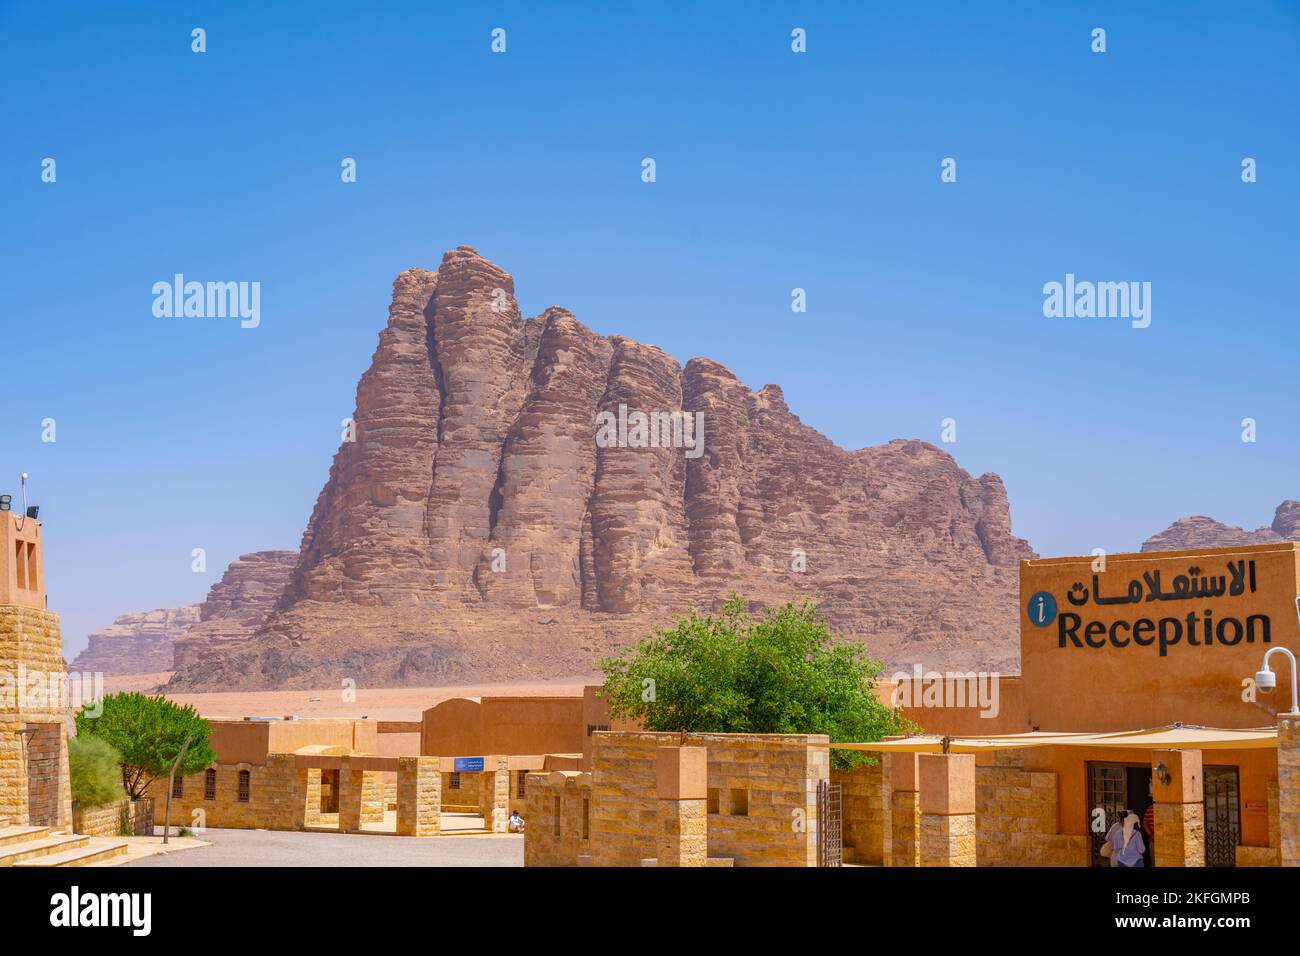 The Wadi Rum visitors centre and the 7 pillars of wisdom mountain in the distance. Stock Photo